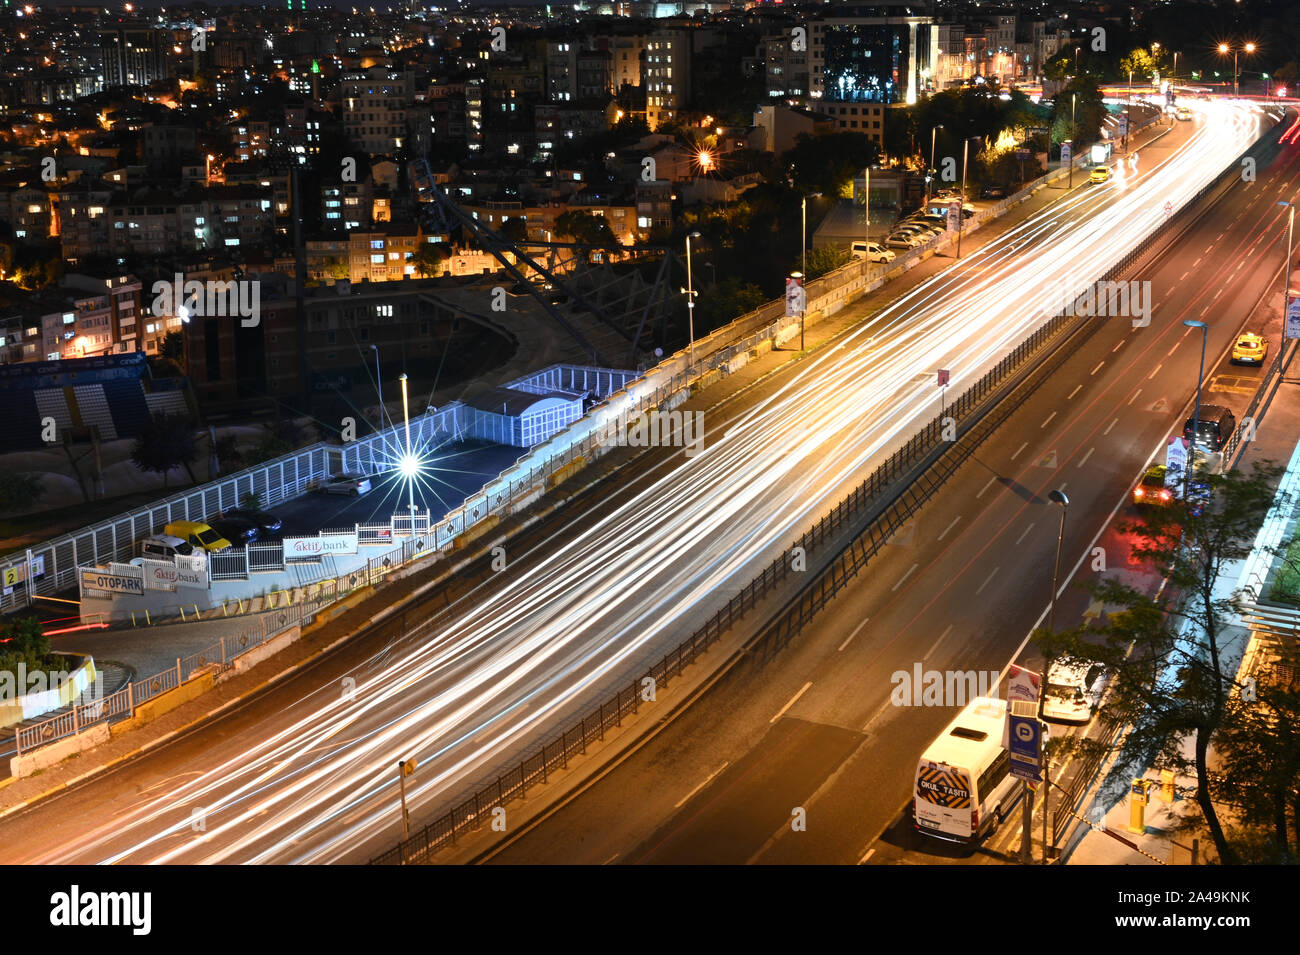 Istanbul, Turkey - October 7, 2019: A long-exposure shot of a highway in Istanbul at night. Stock Photo